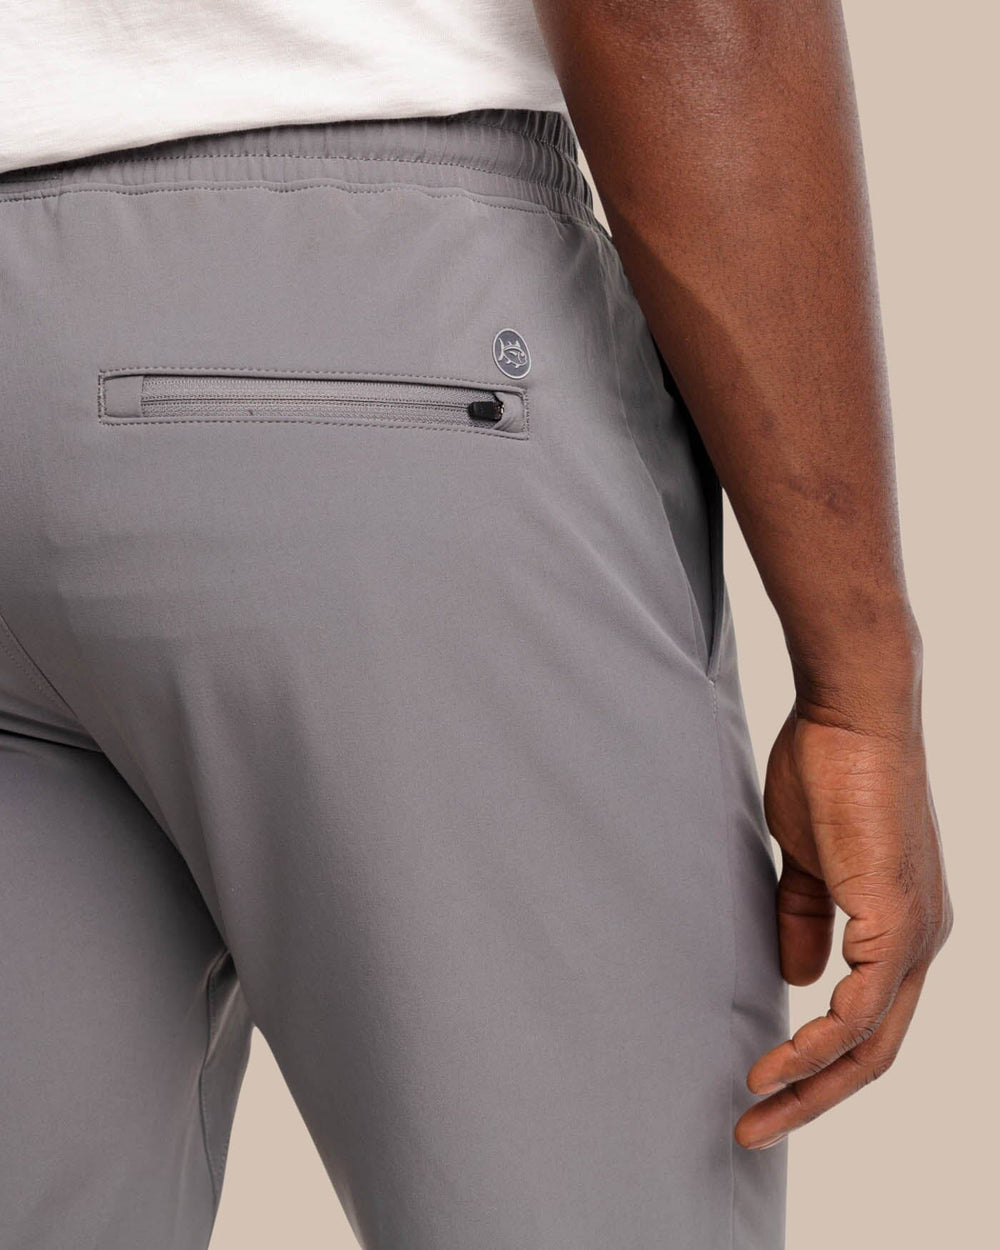 The detail view of the The Excursion Performance Jogger by Southern Tide - Smoked Pearl